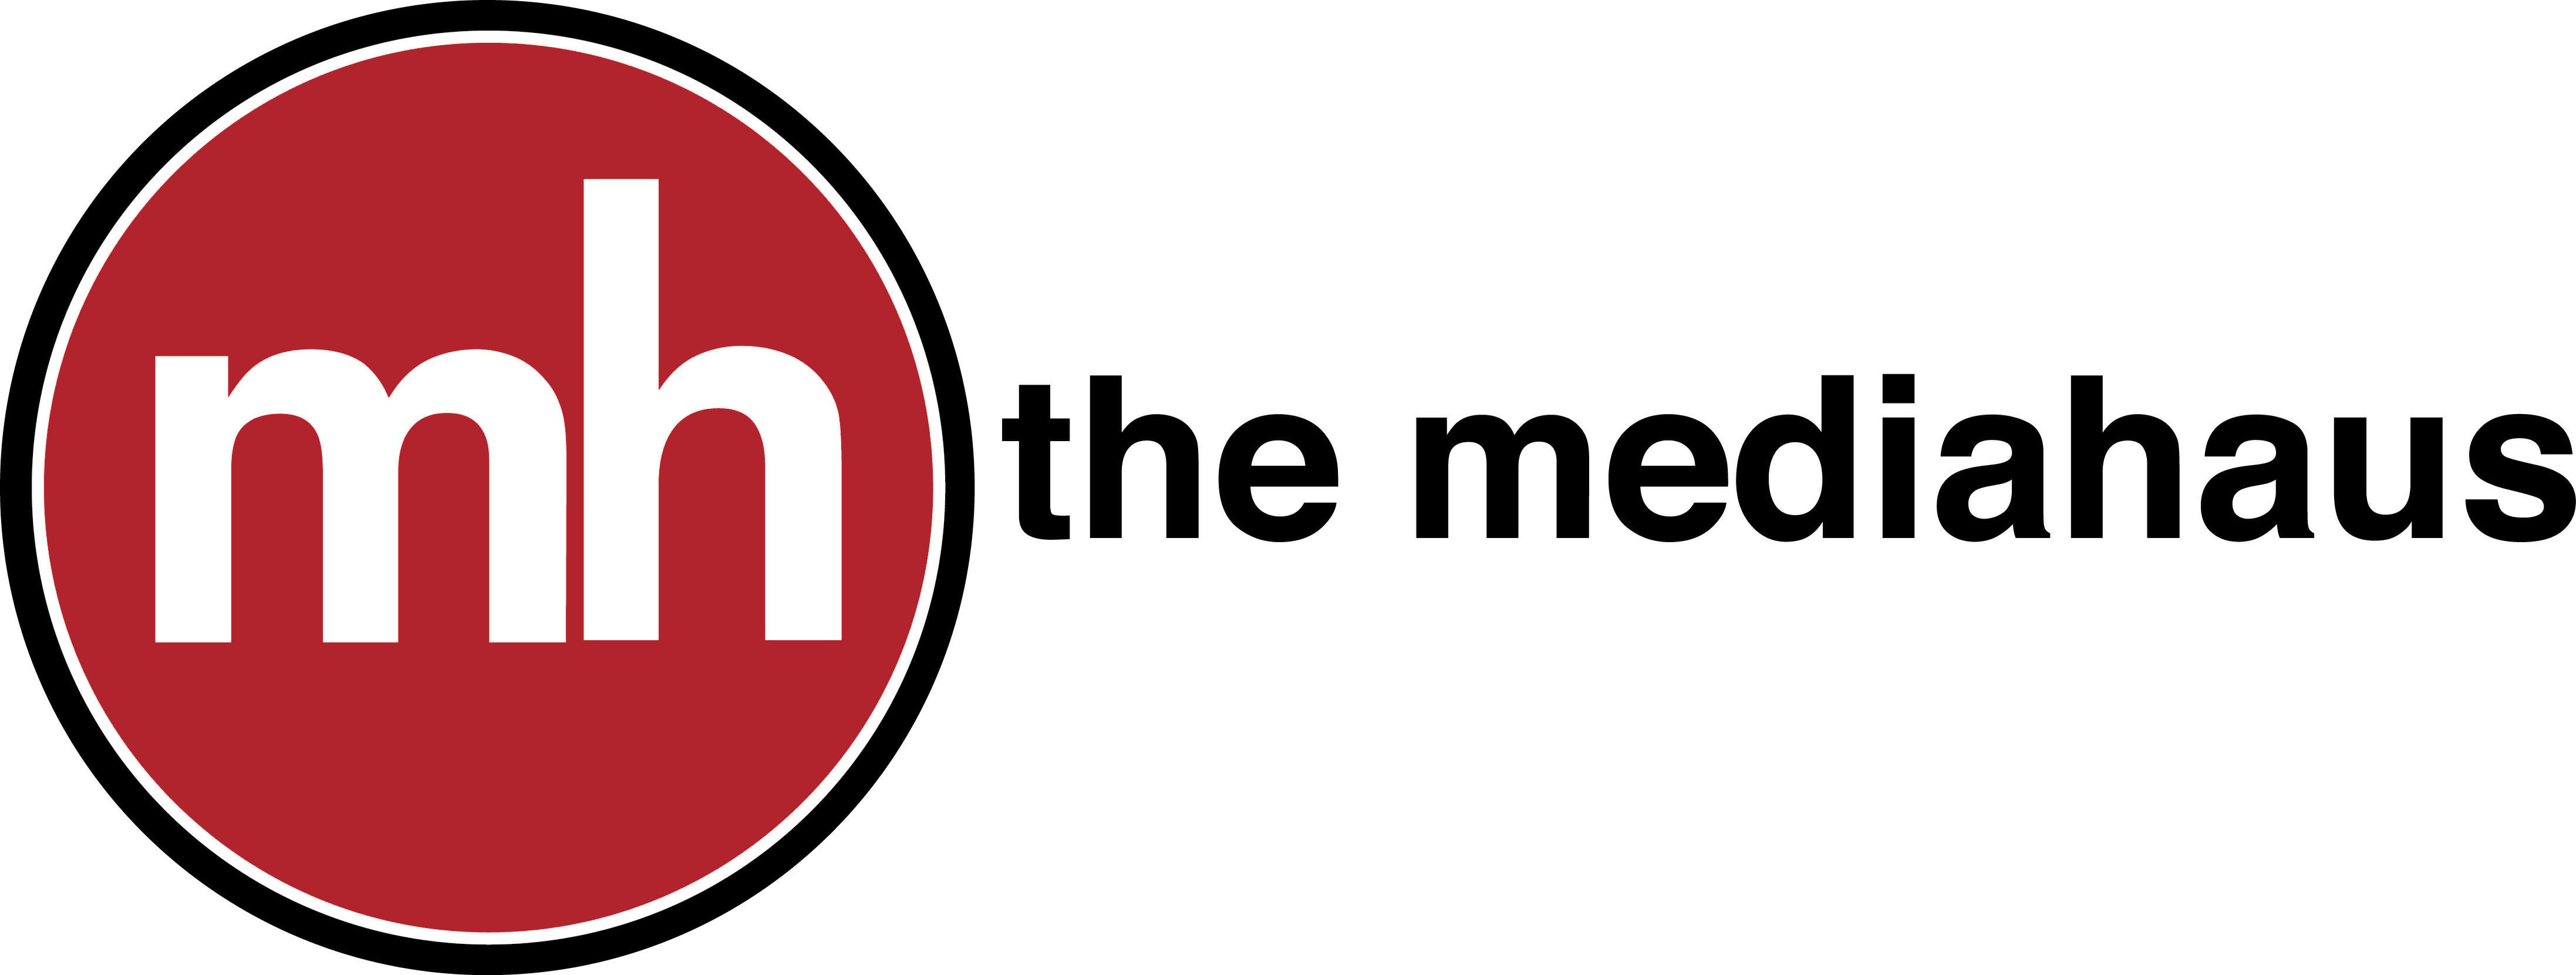 The MediaHaus